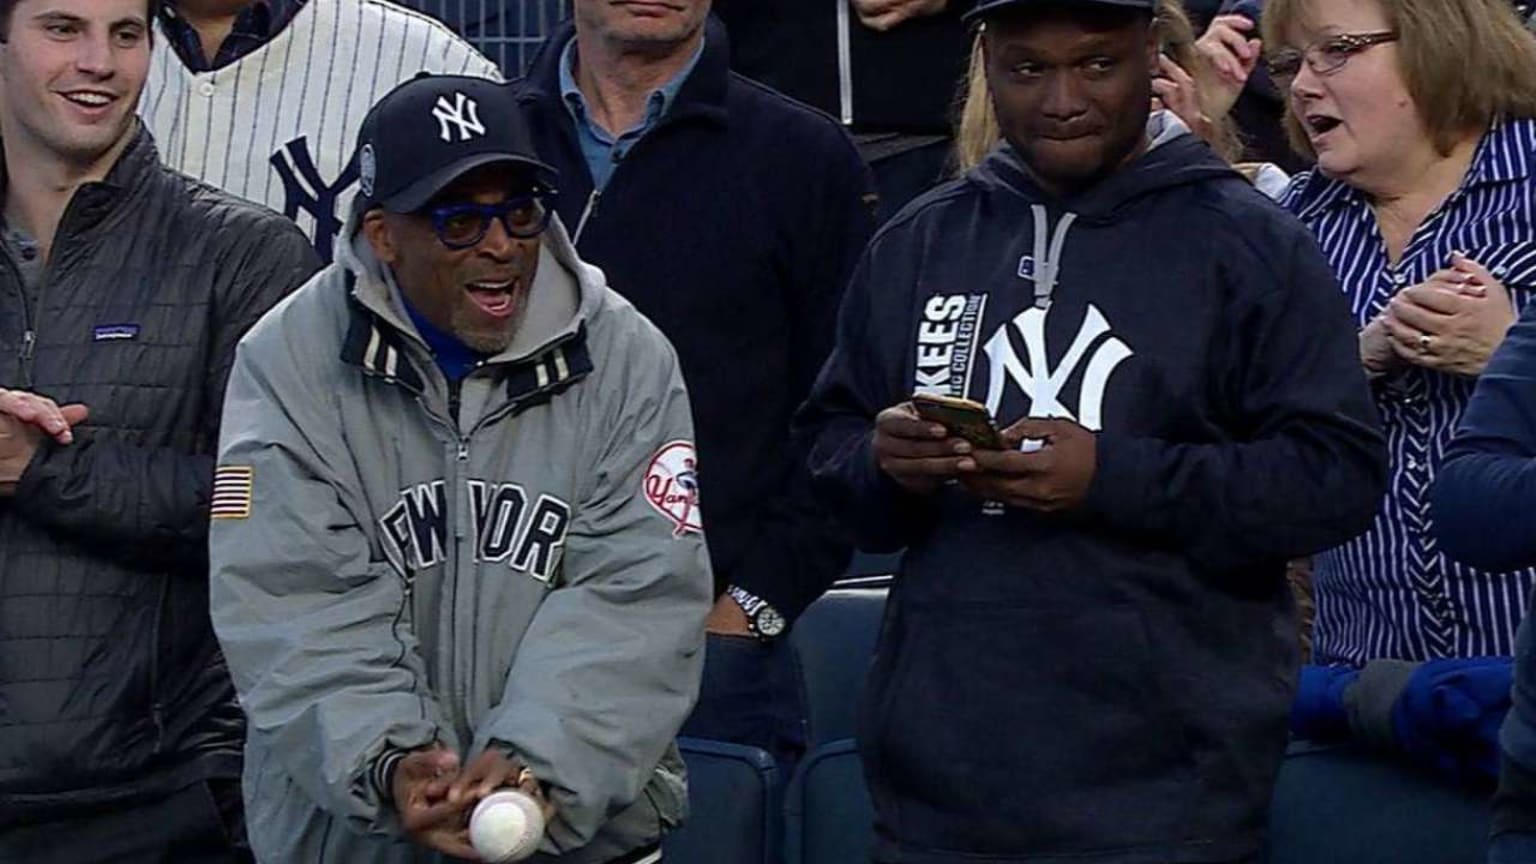 Yankees vs. Red Sox Is the Stuff of Movies. Just Ask Spike Lee